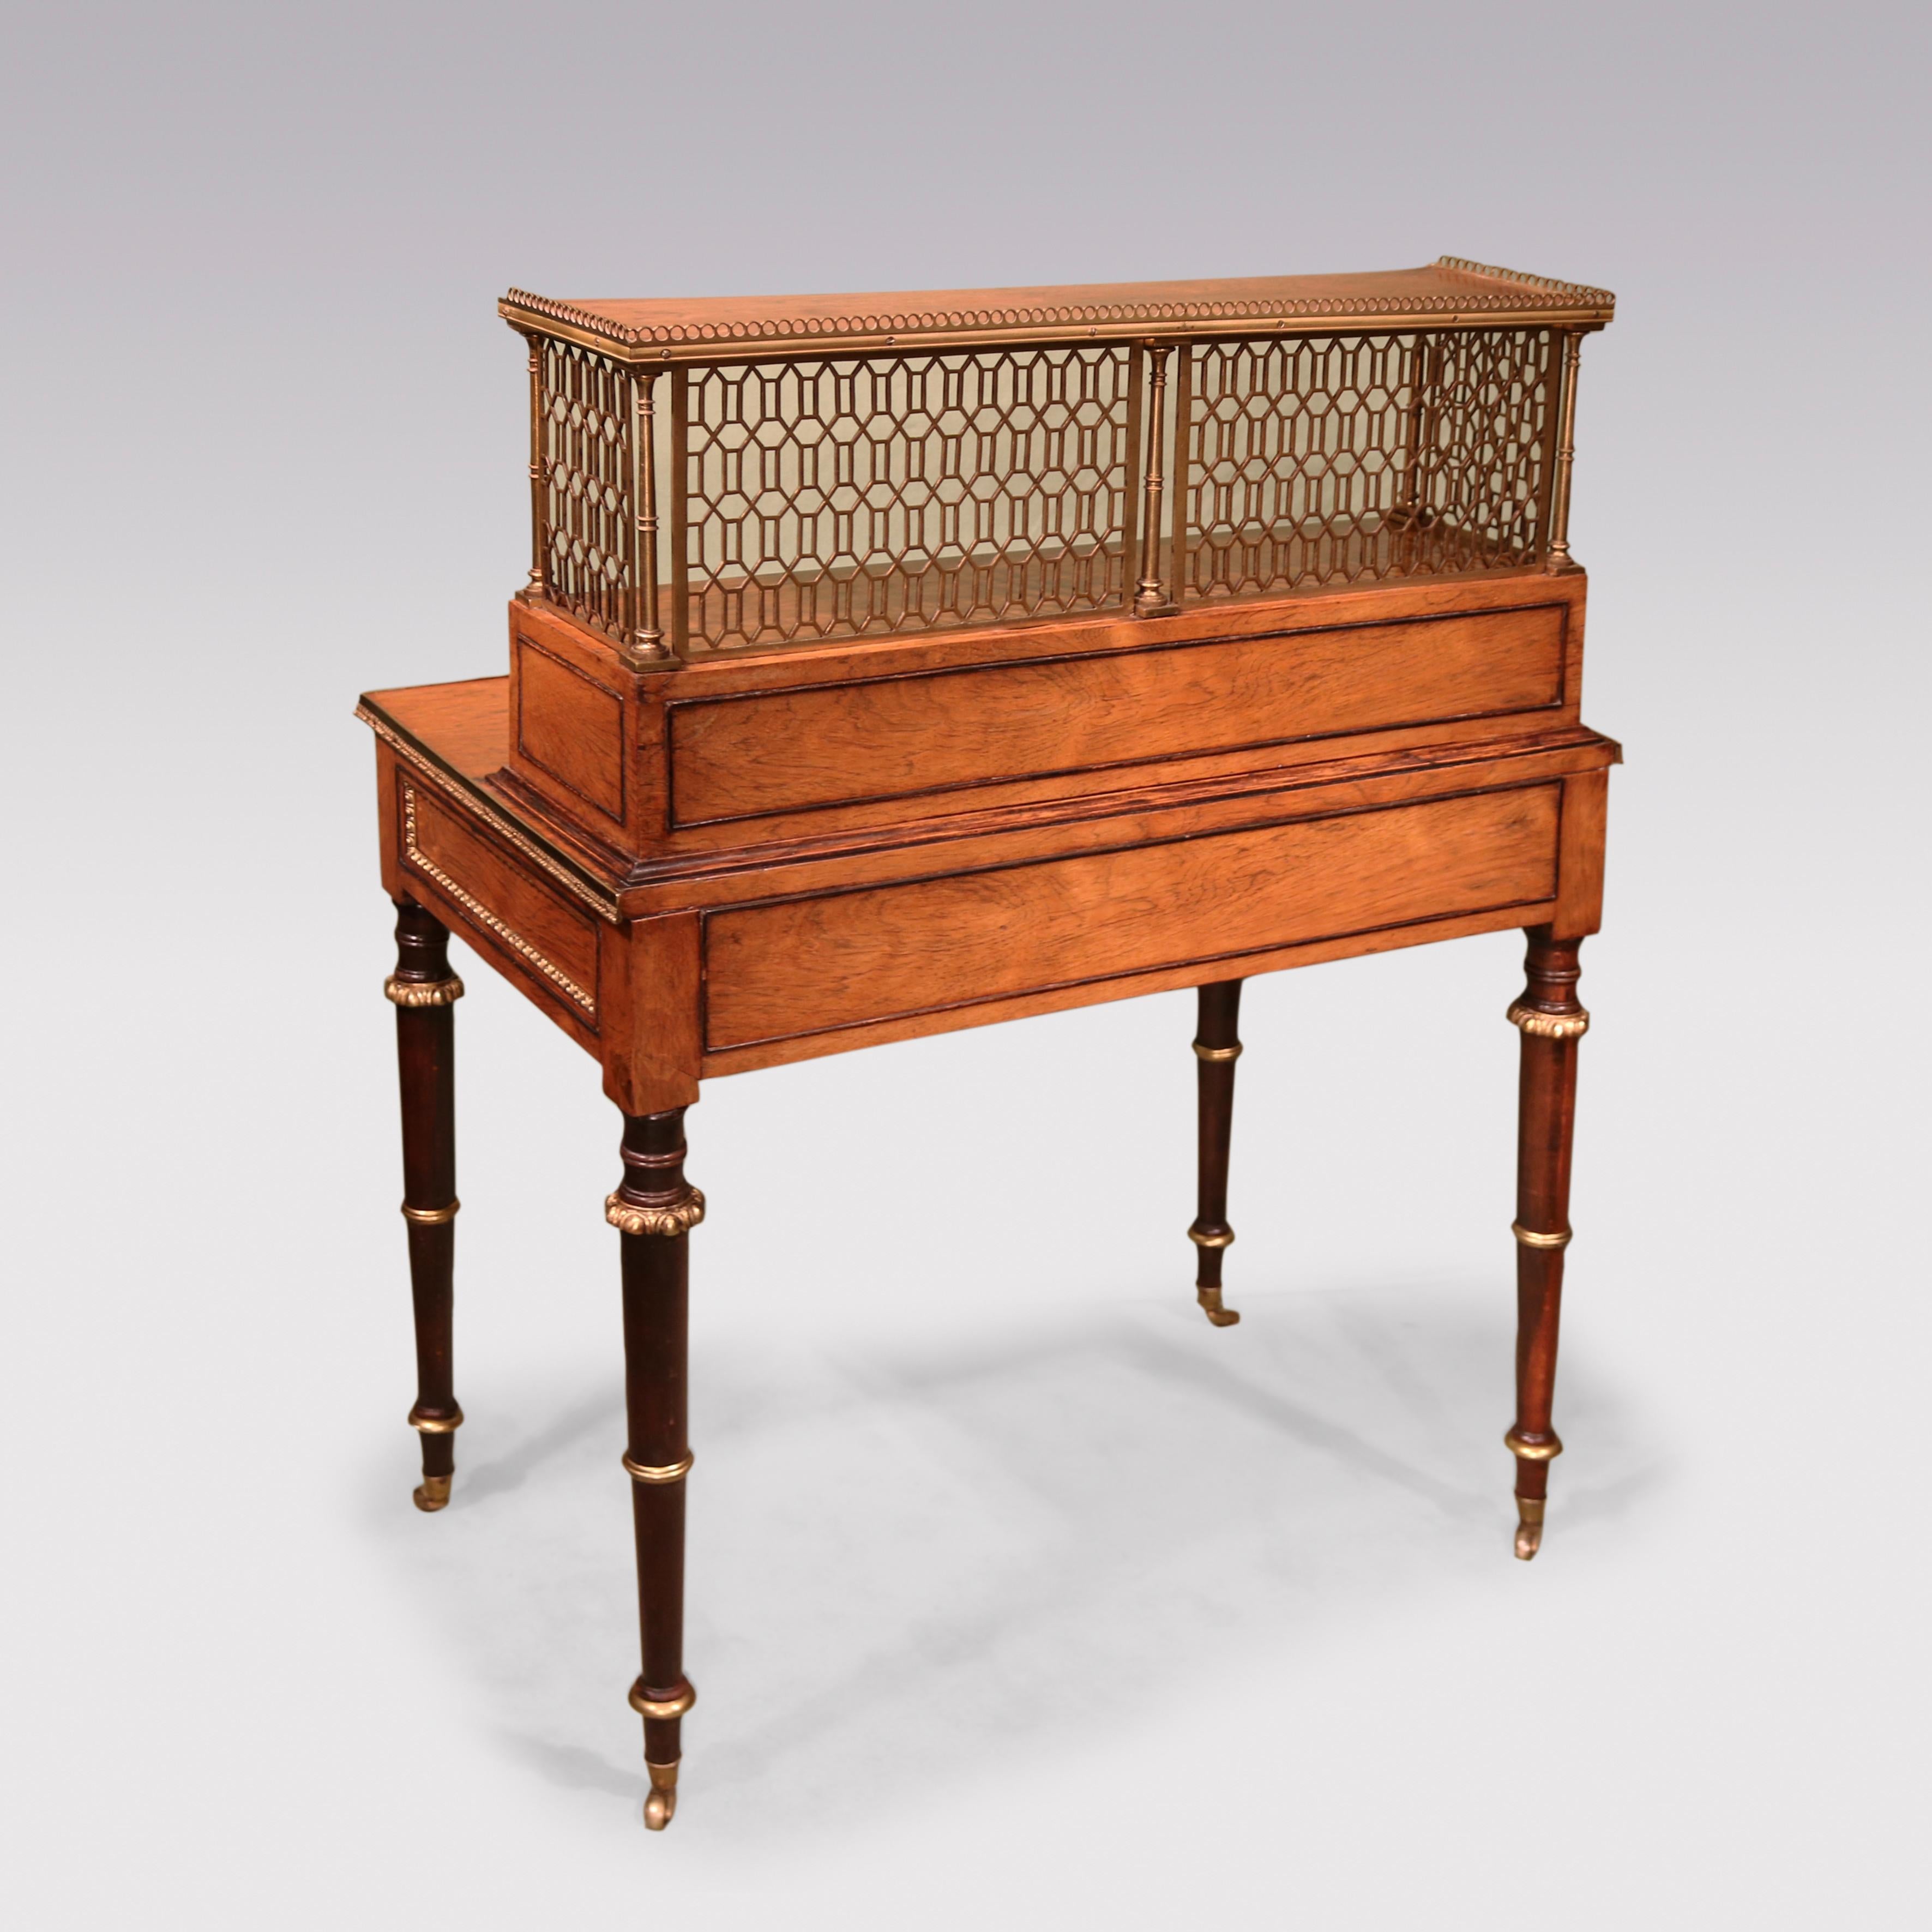 Antique Early 19th Century Rosewood Bonheur Du Jour in the Style of John Mclean For Sale 2